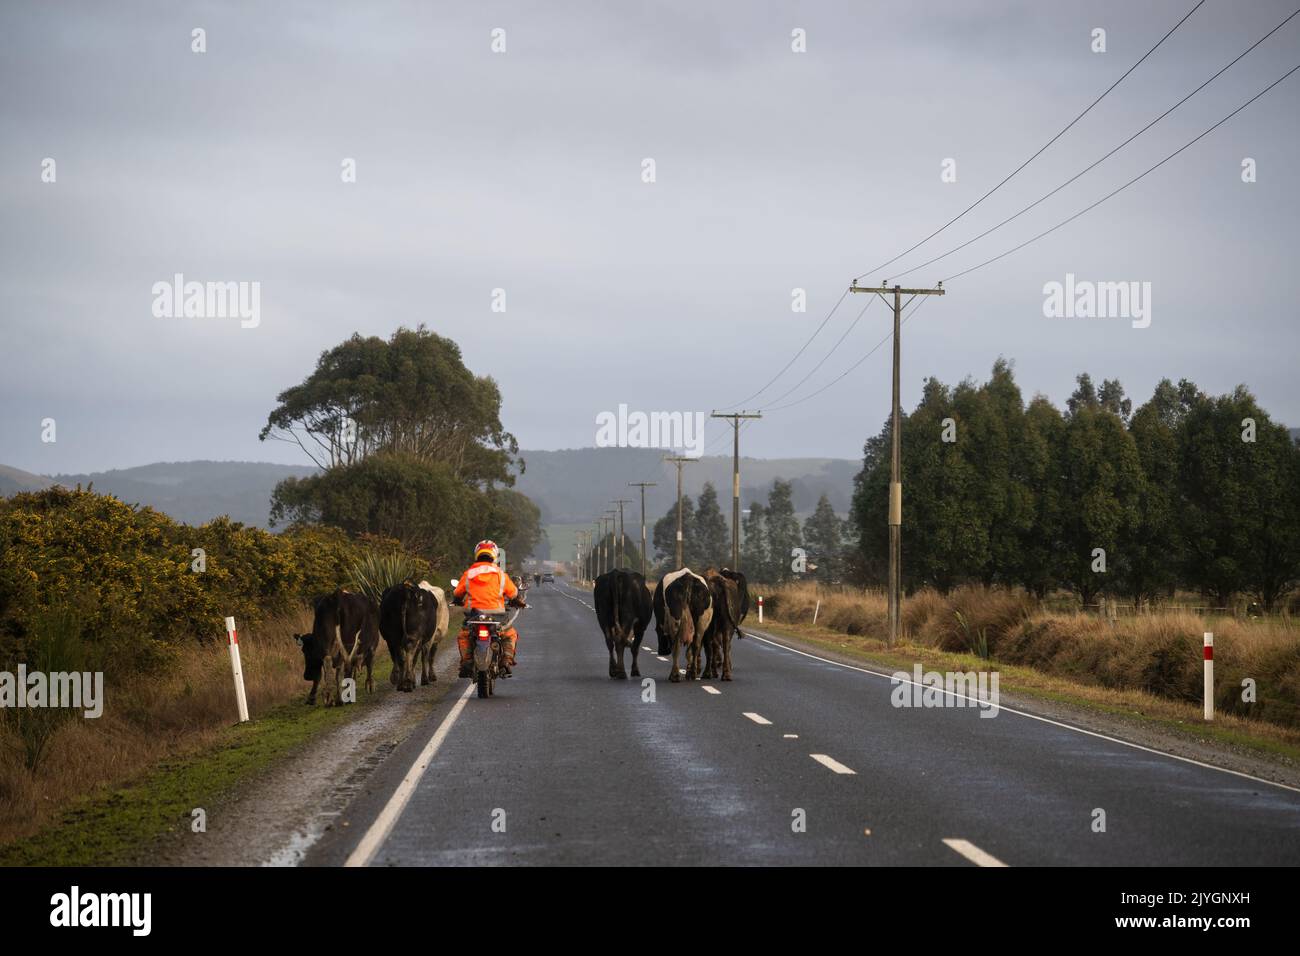 Farmers moving cows on the country road, blocking the traffic. Central Otago, New Zealand. Stock Photo